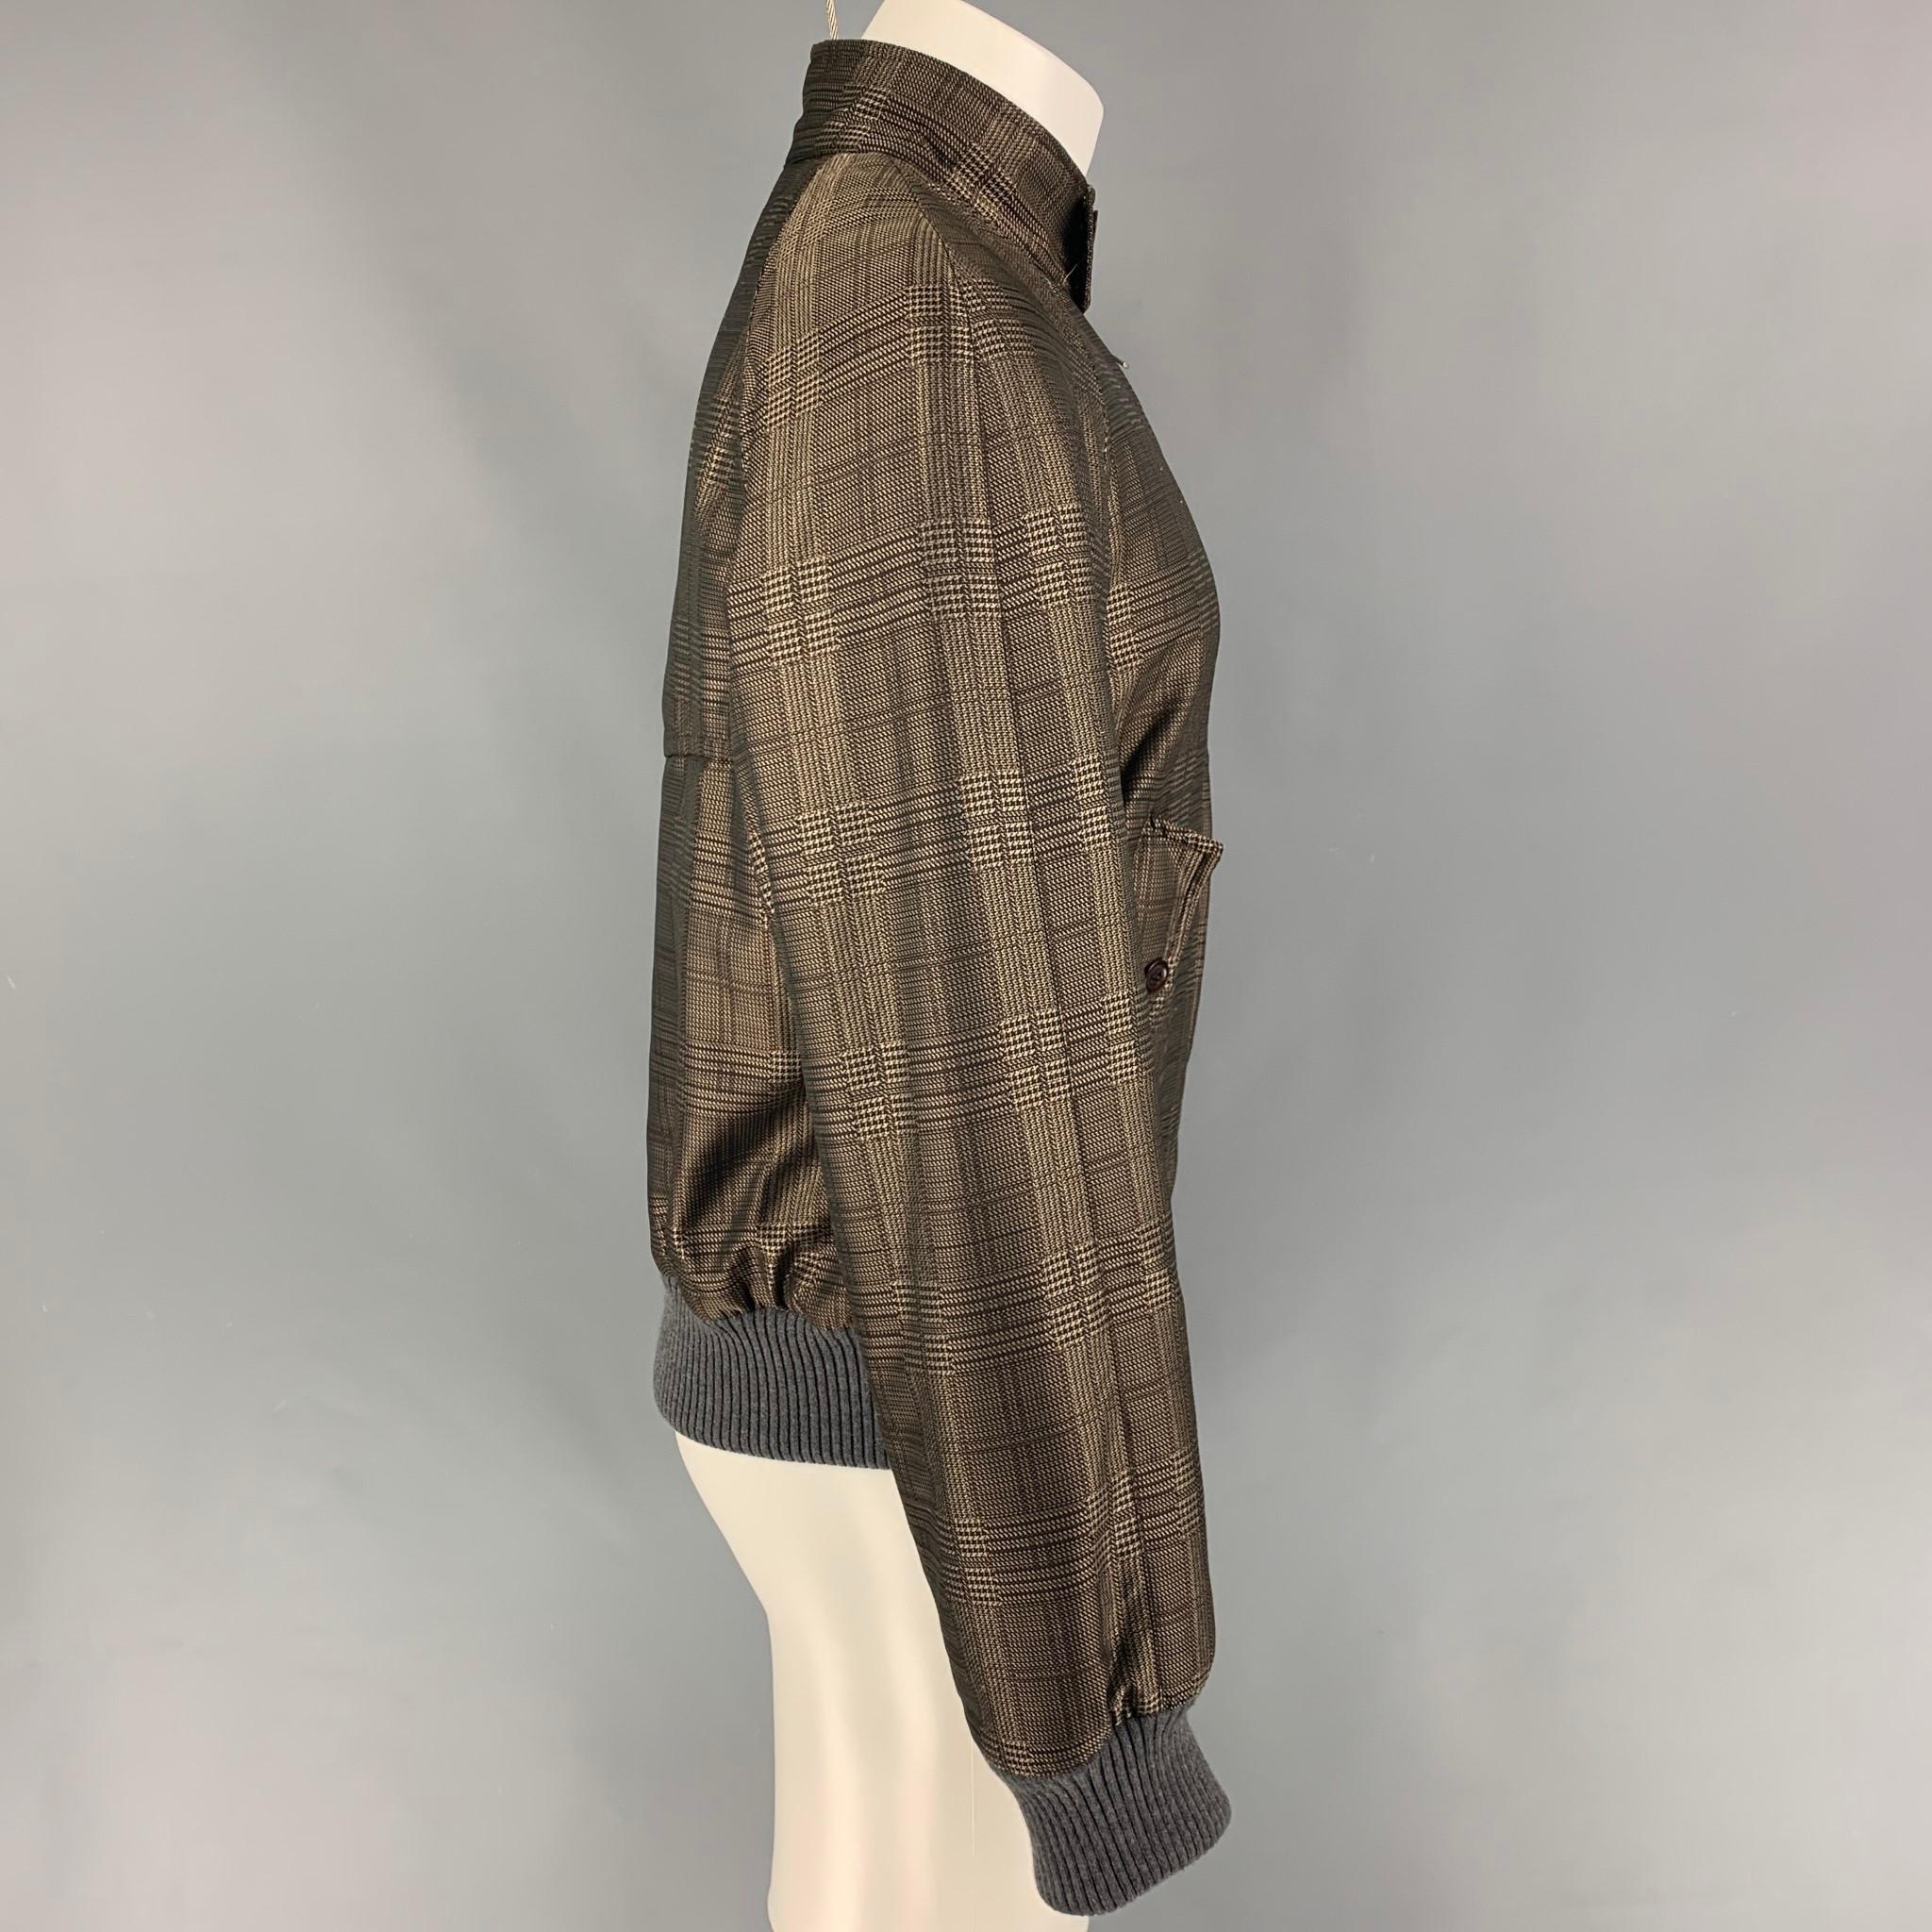 DRIES VAN NOTEN jacket comes in a brown & grey plaid polyester with a flannel lining featuring a bomber style, ribbed hem, flap pockets, buttoned collar, and a full zip up closure. 

Excellent Pre-Owned Condition.
Marked: M

Measurements:

Shoulder: